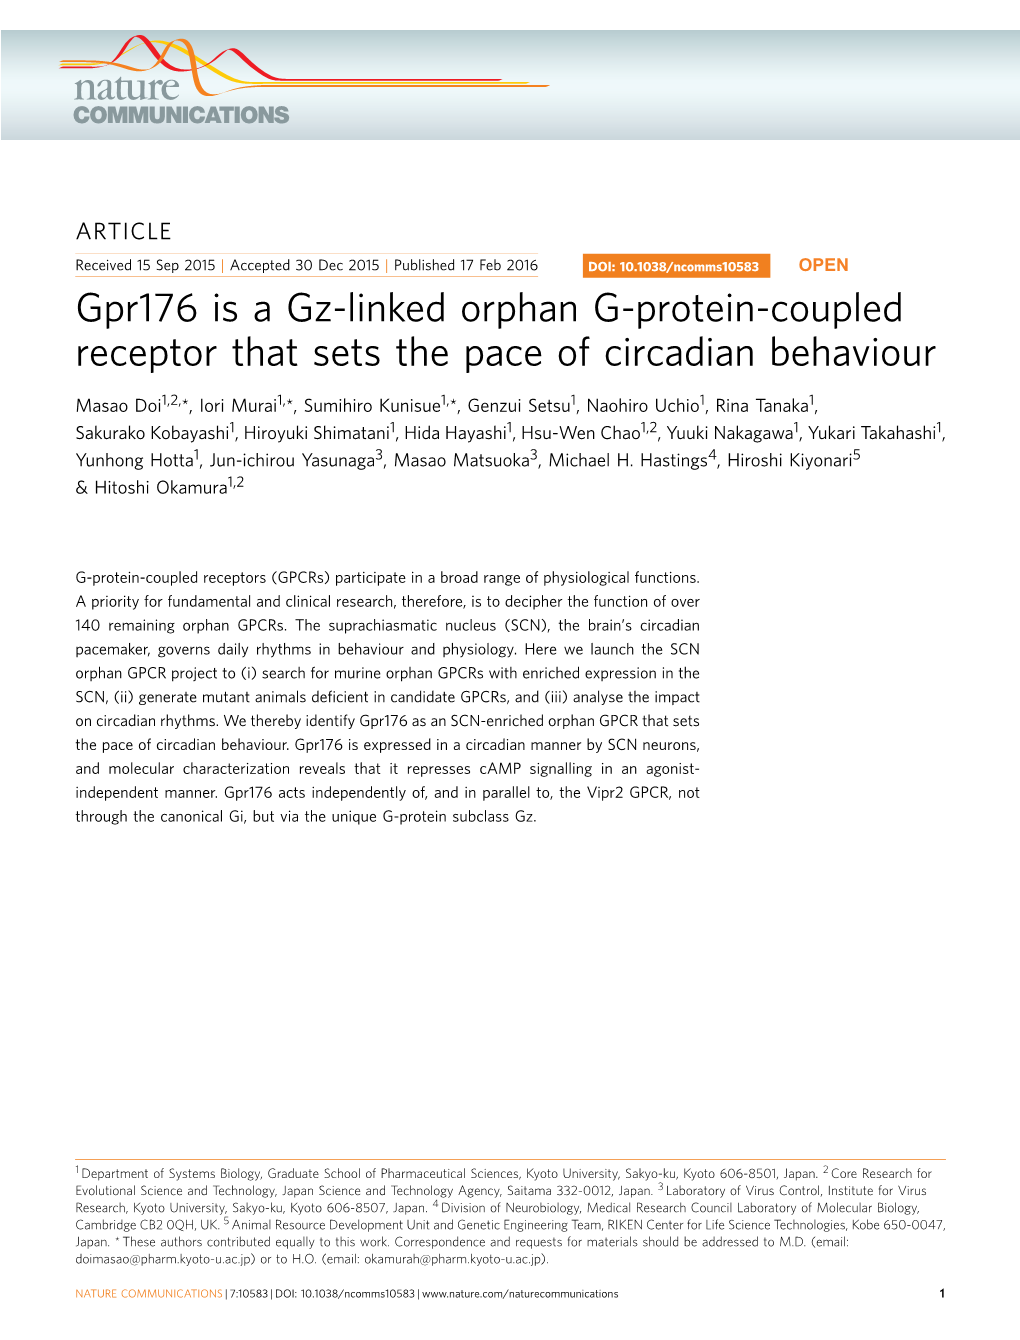 Gpr176 Is a Gz-Linked Orphan G-Protein-Coupled Receptor That Sets the Pace of Circadian Behaviour